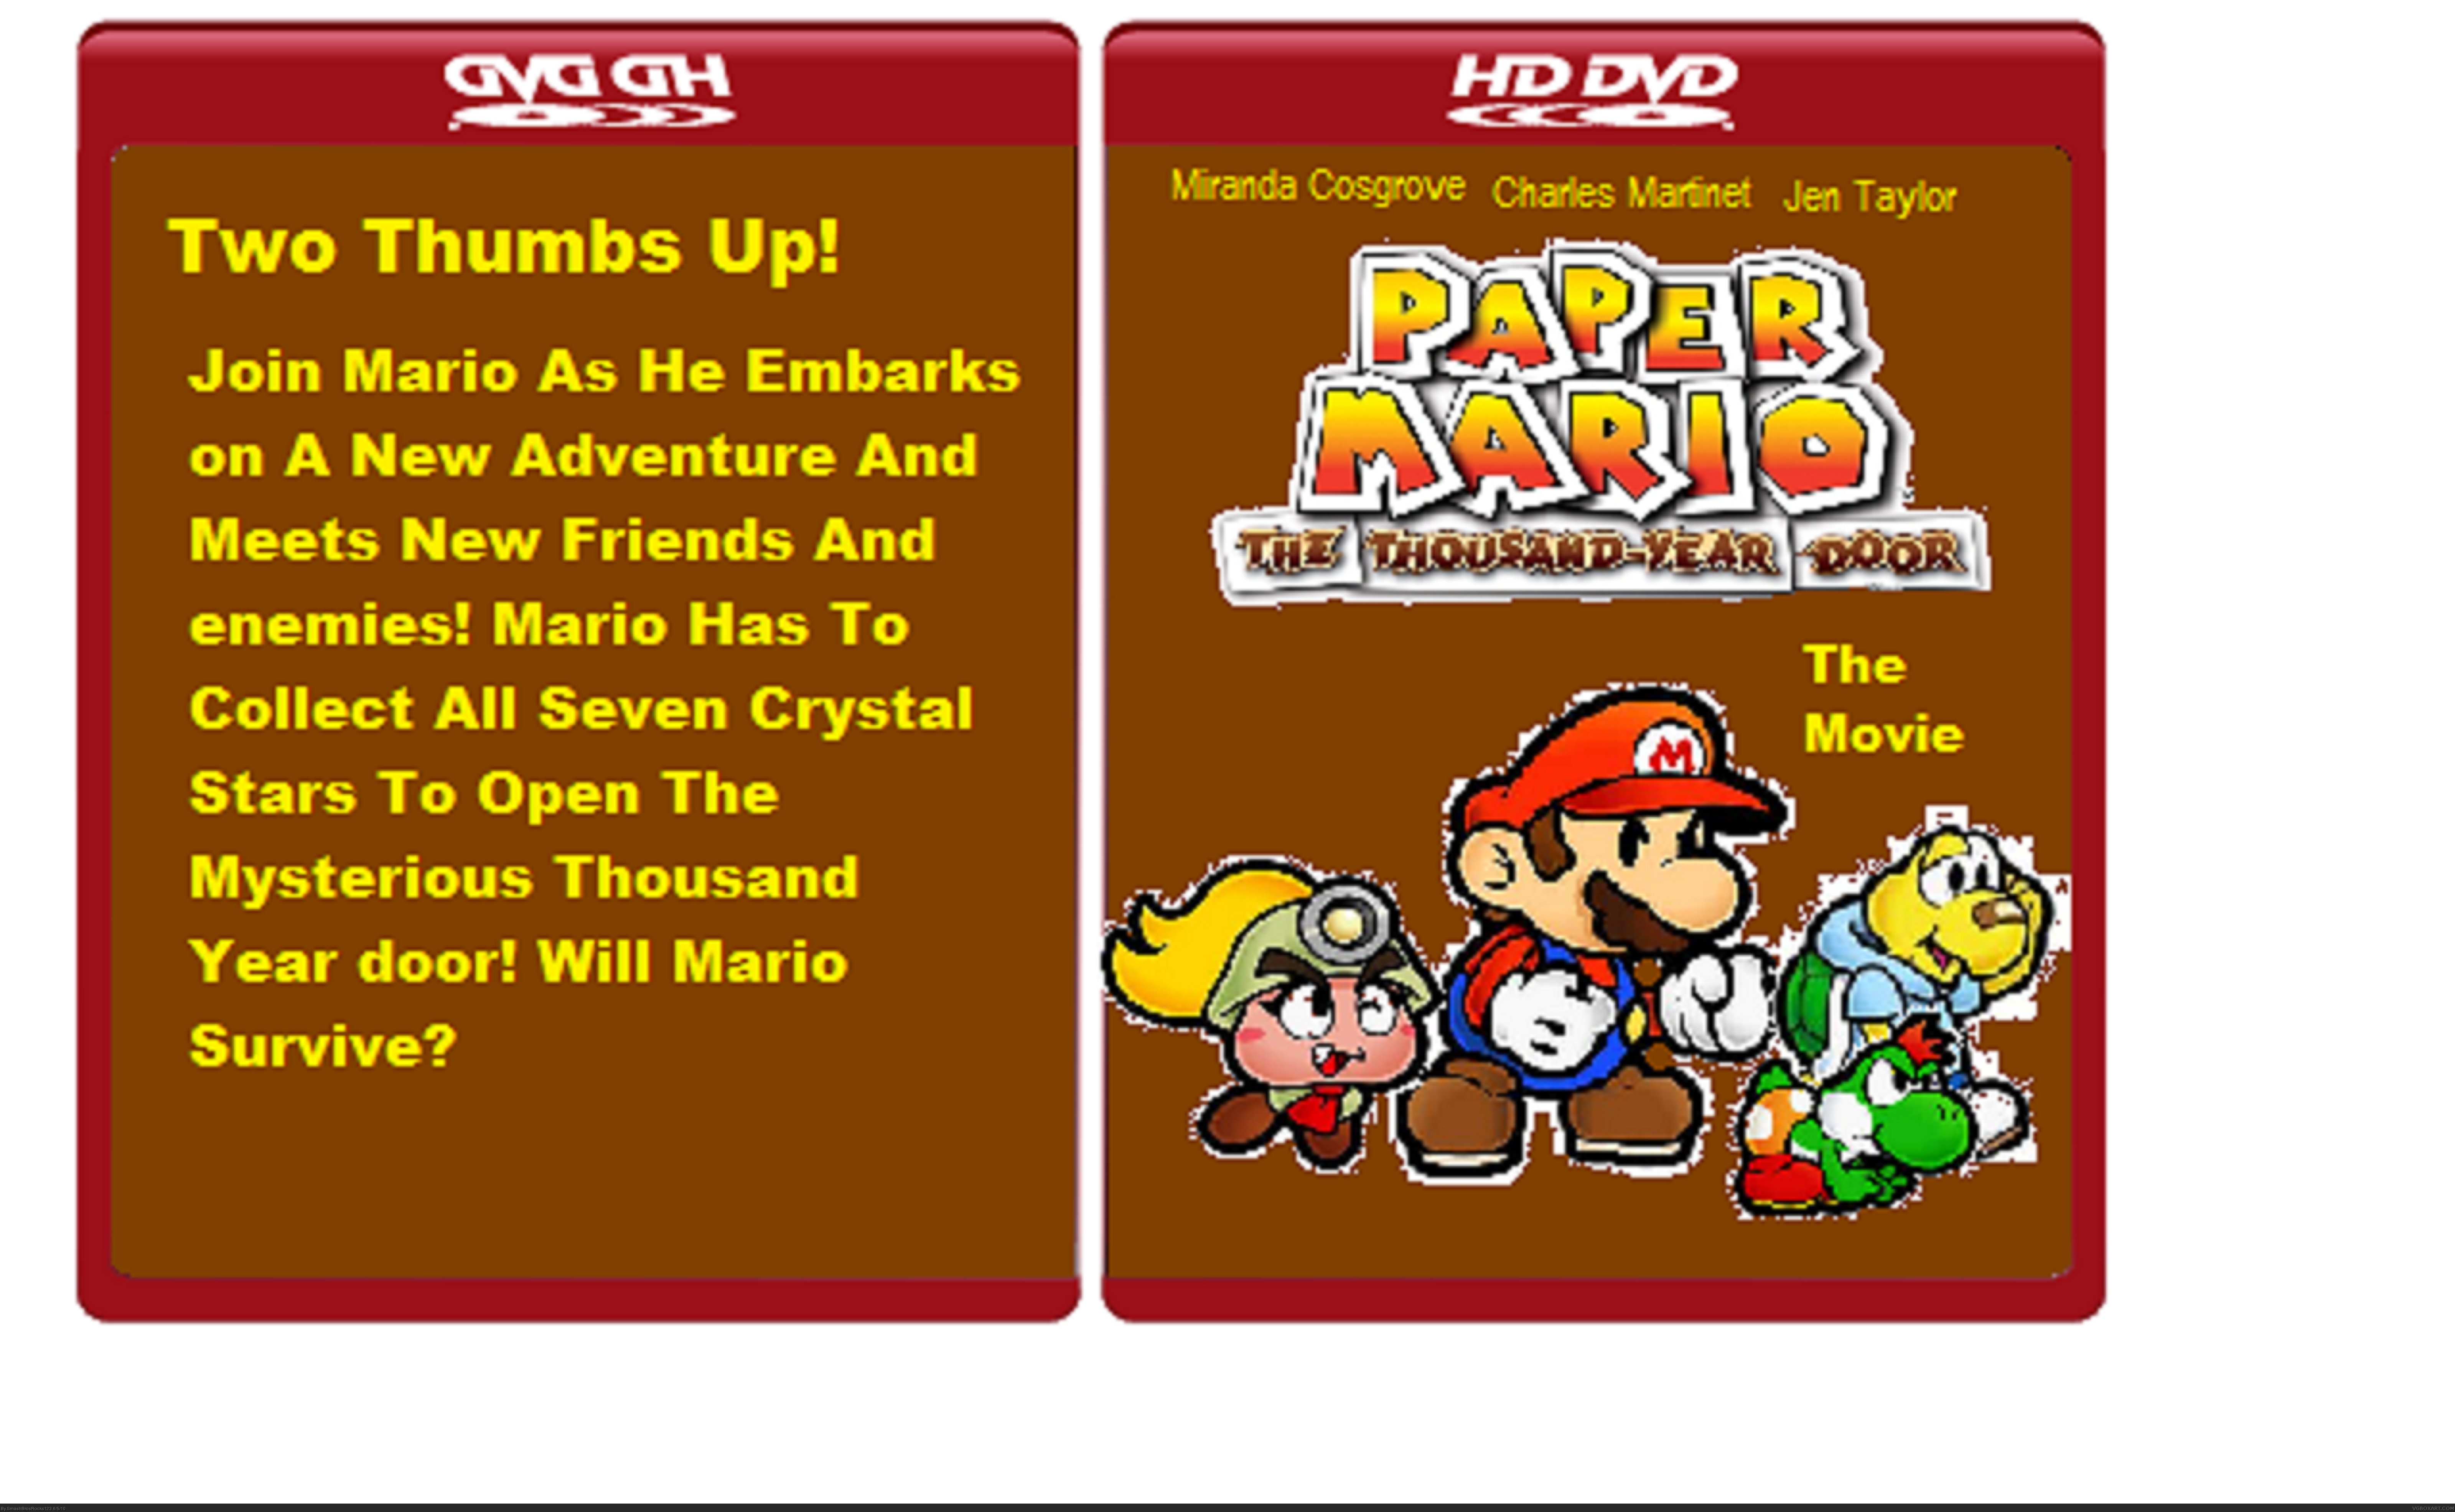 Paper Mario The Thousand Year Door The Movie box cover